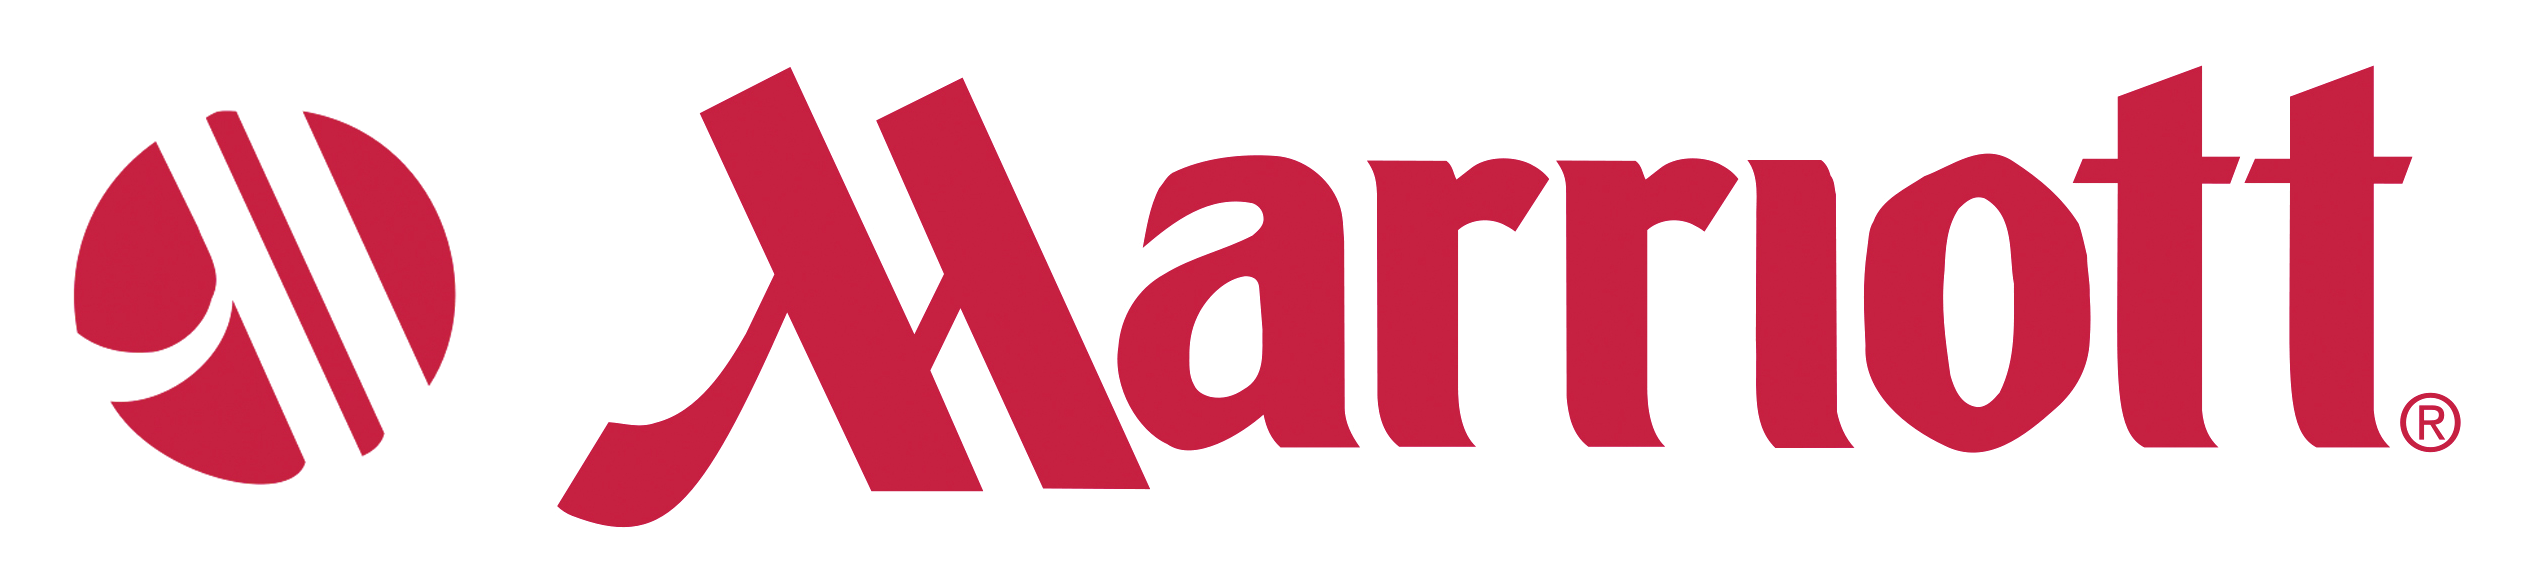 Marriott Logo PNG Image - PurePNG | Free transparent CC0 PNG Image Library